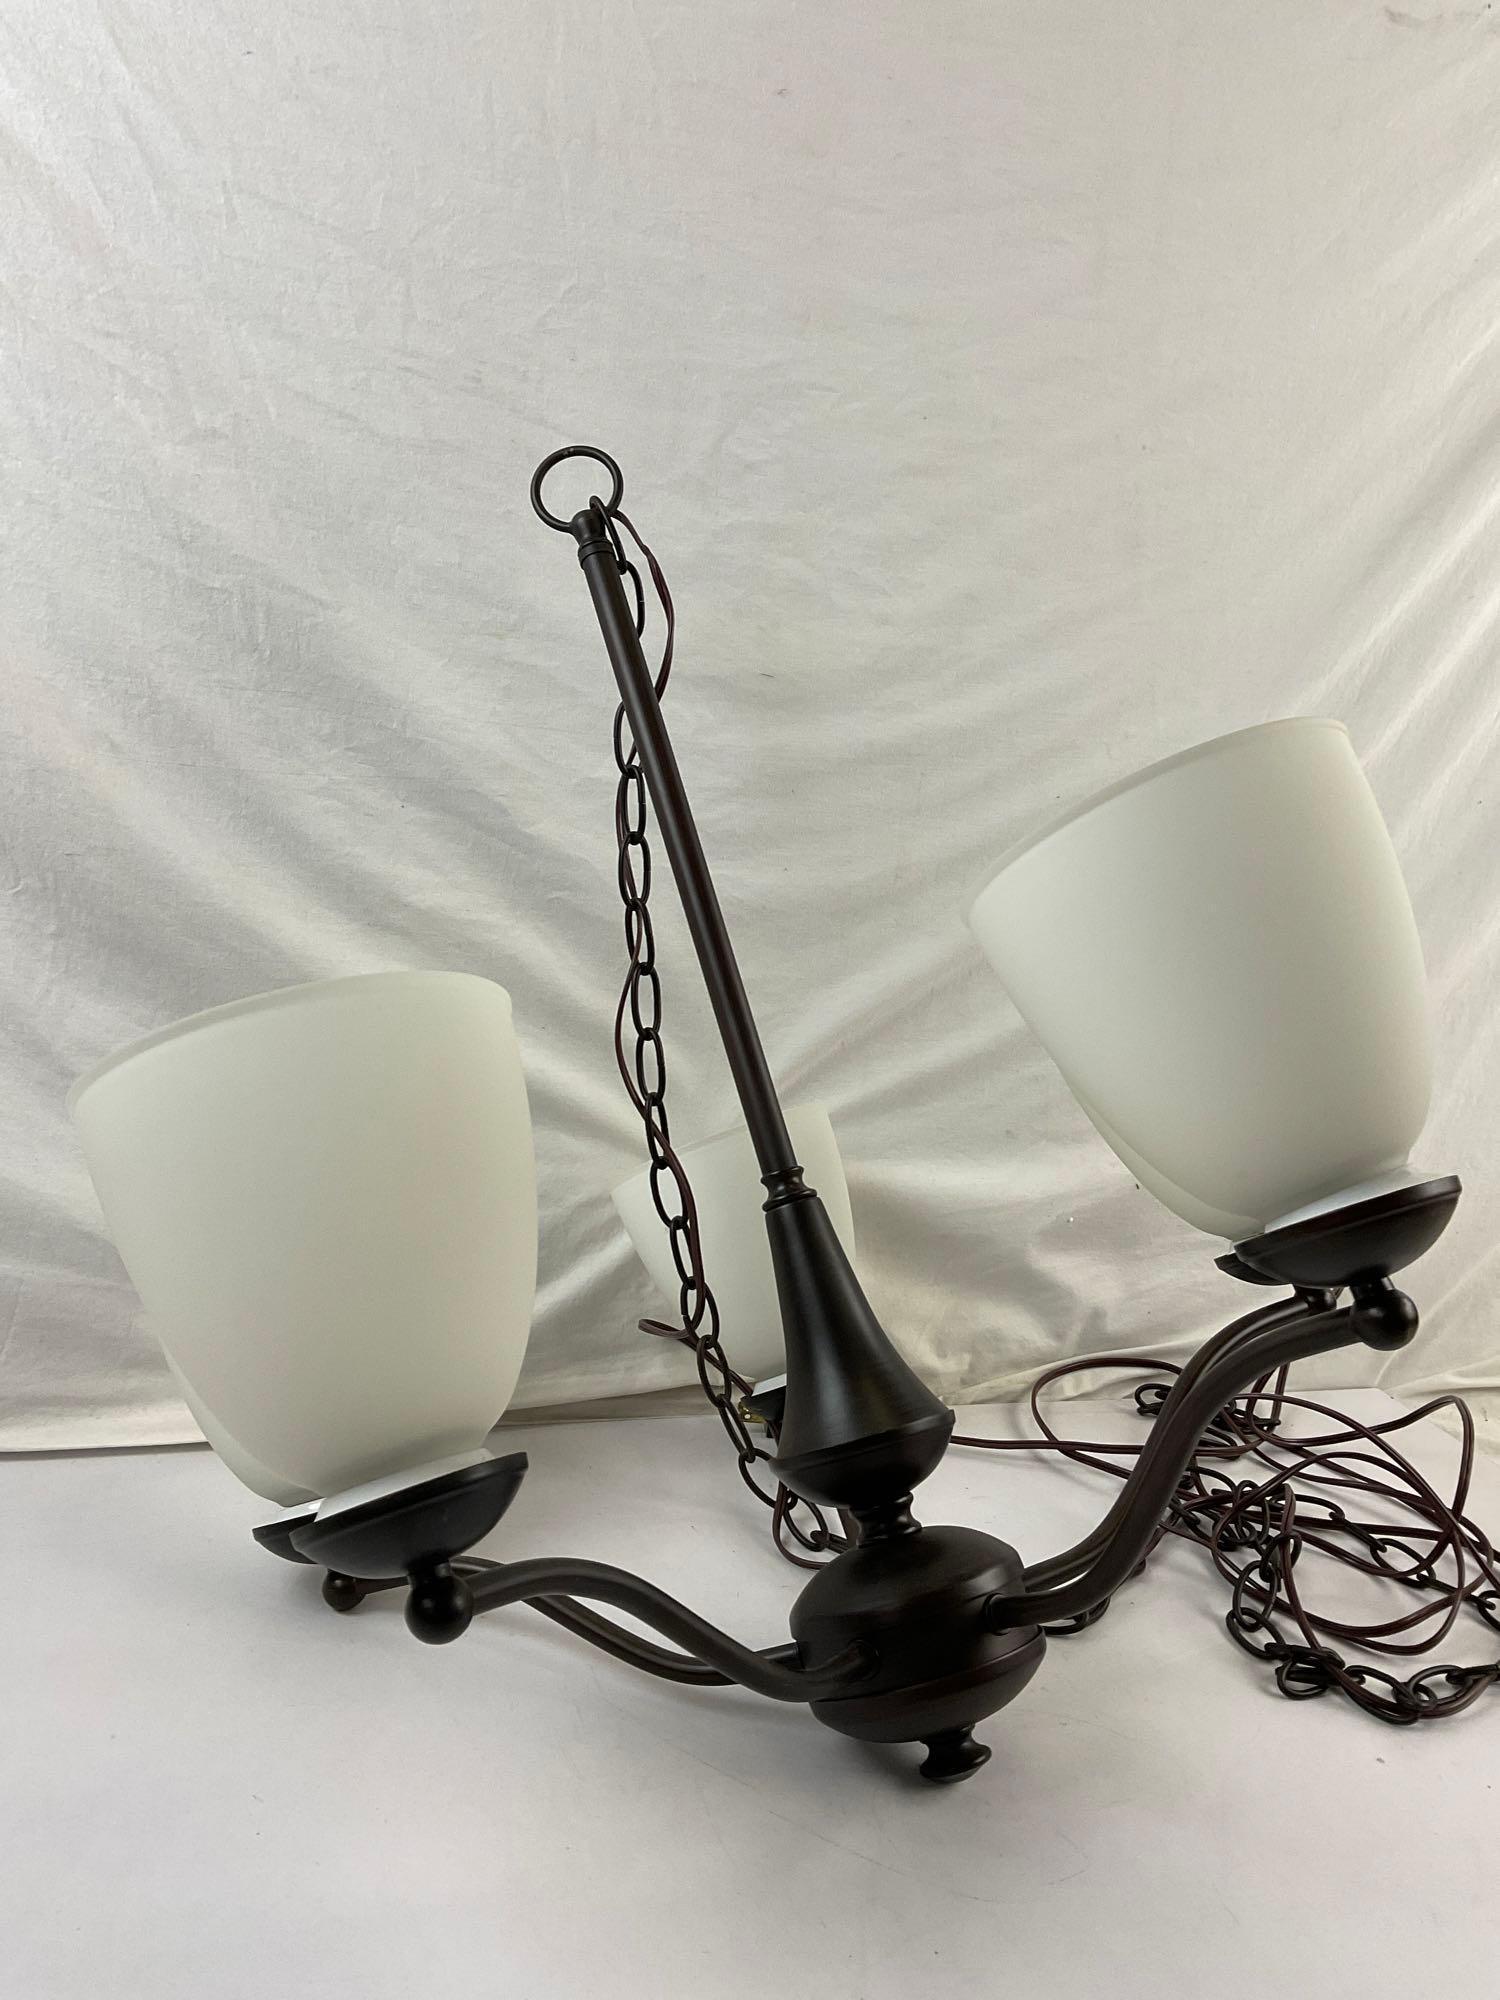 Vintage Dark Brown Metal Hanging Ceiling Lamp w/ 5 Lights & Frosted Glass Shades. See pics.